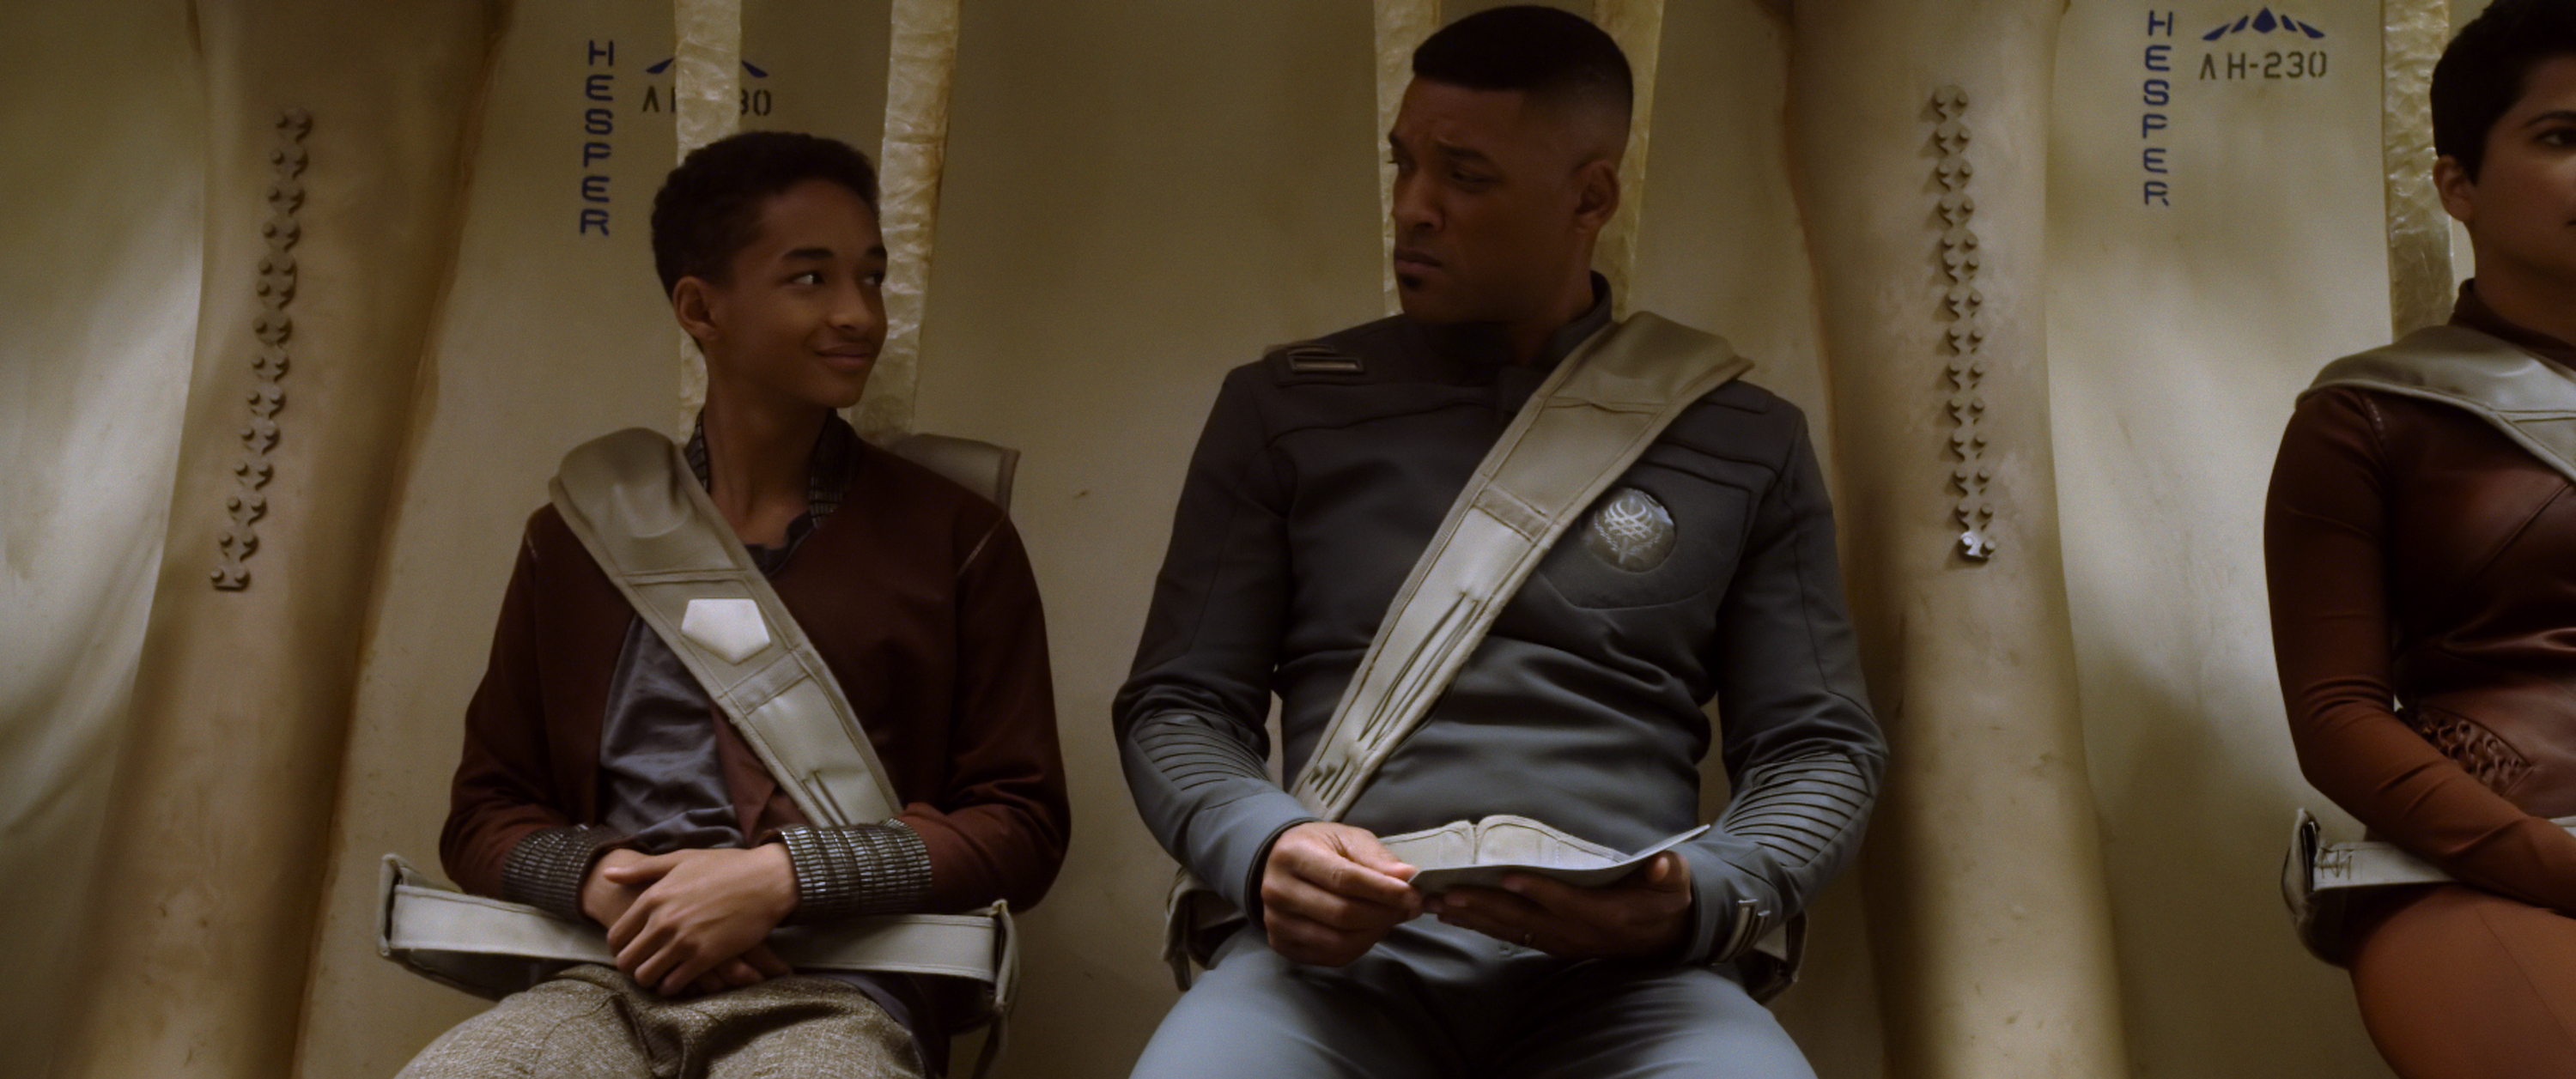 after earth movie release date